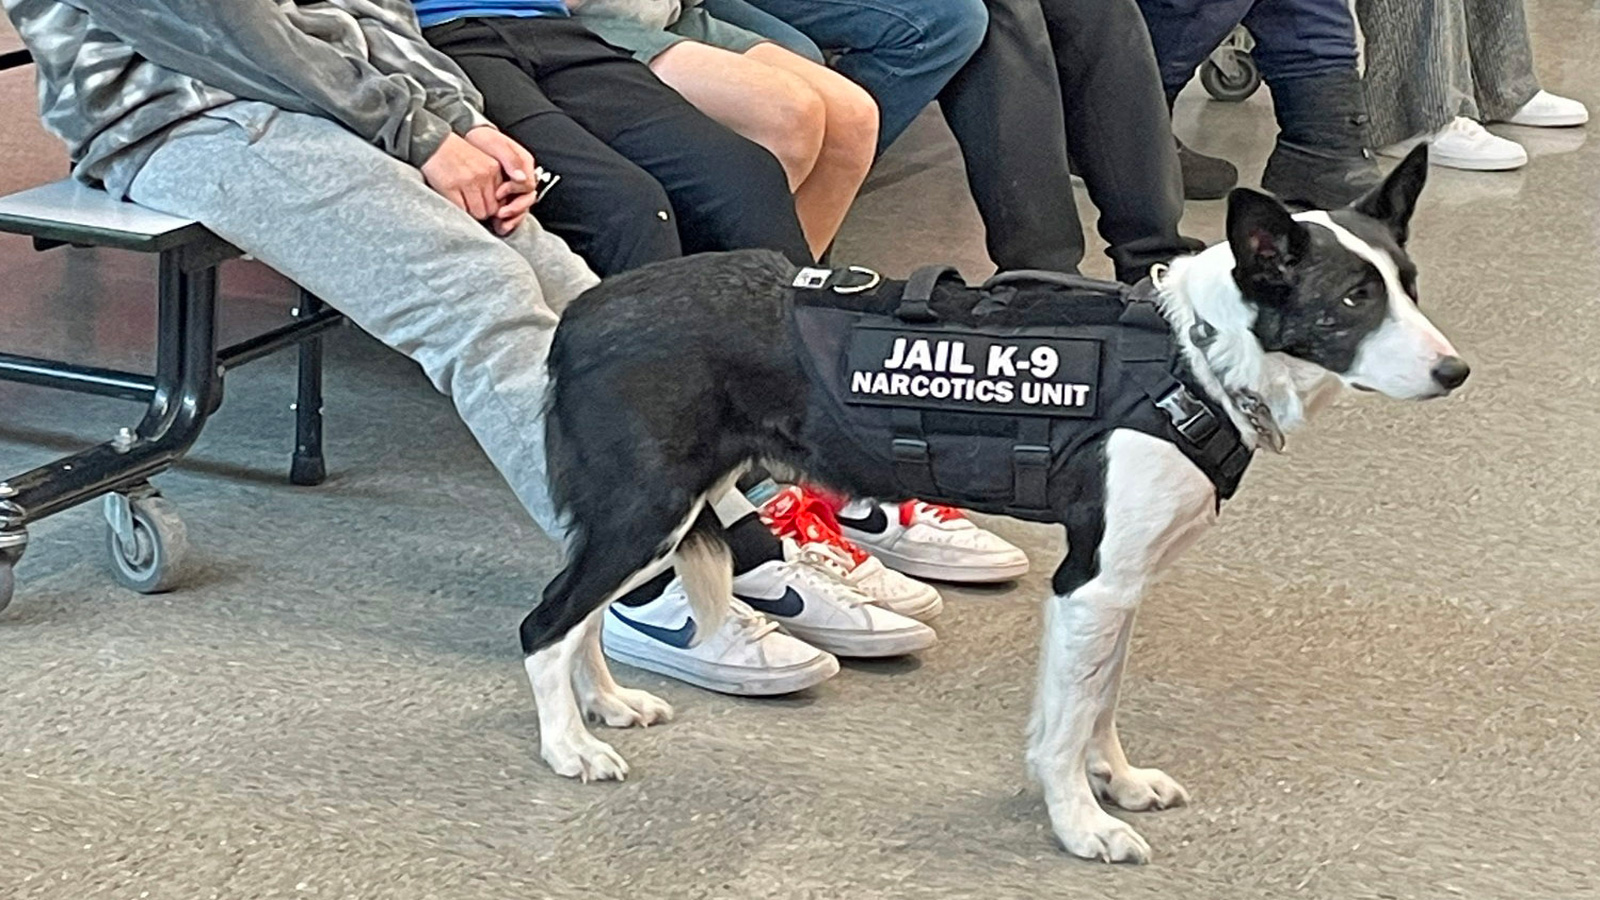 Fundraising efforts underway to cover medical costs for jail’s canine